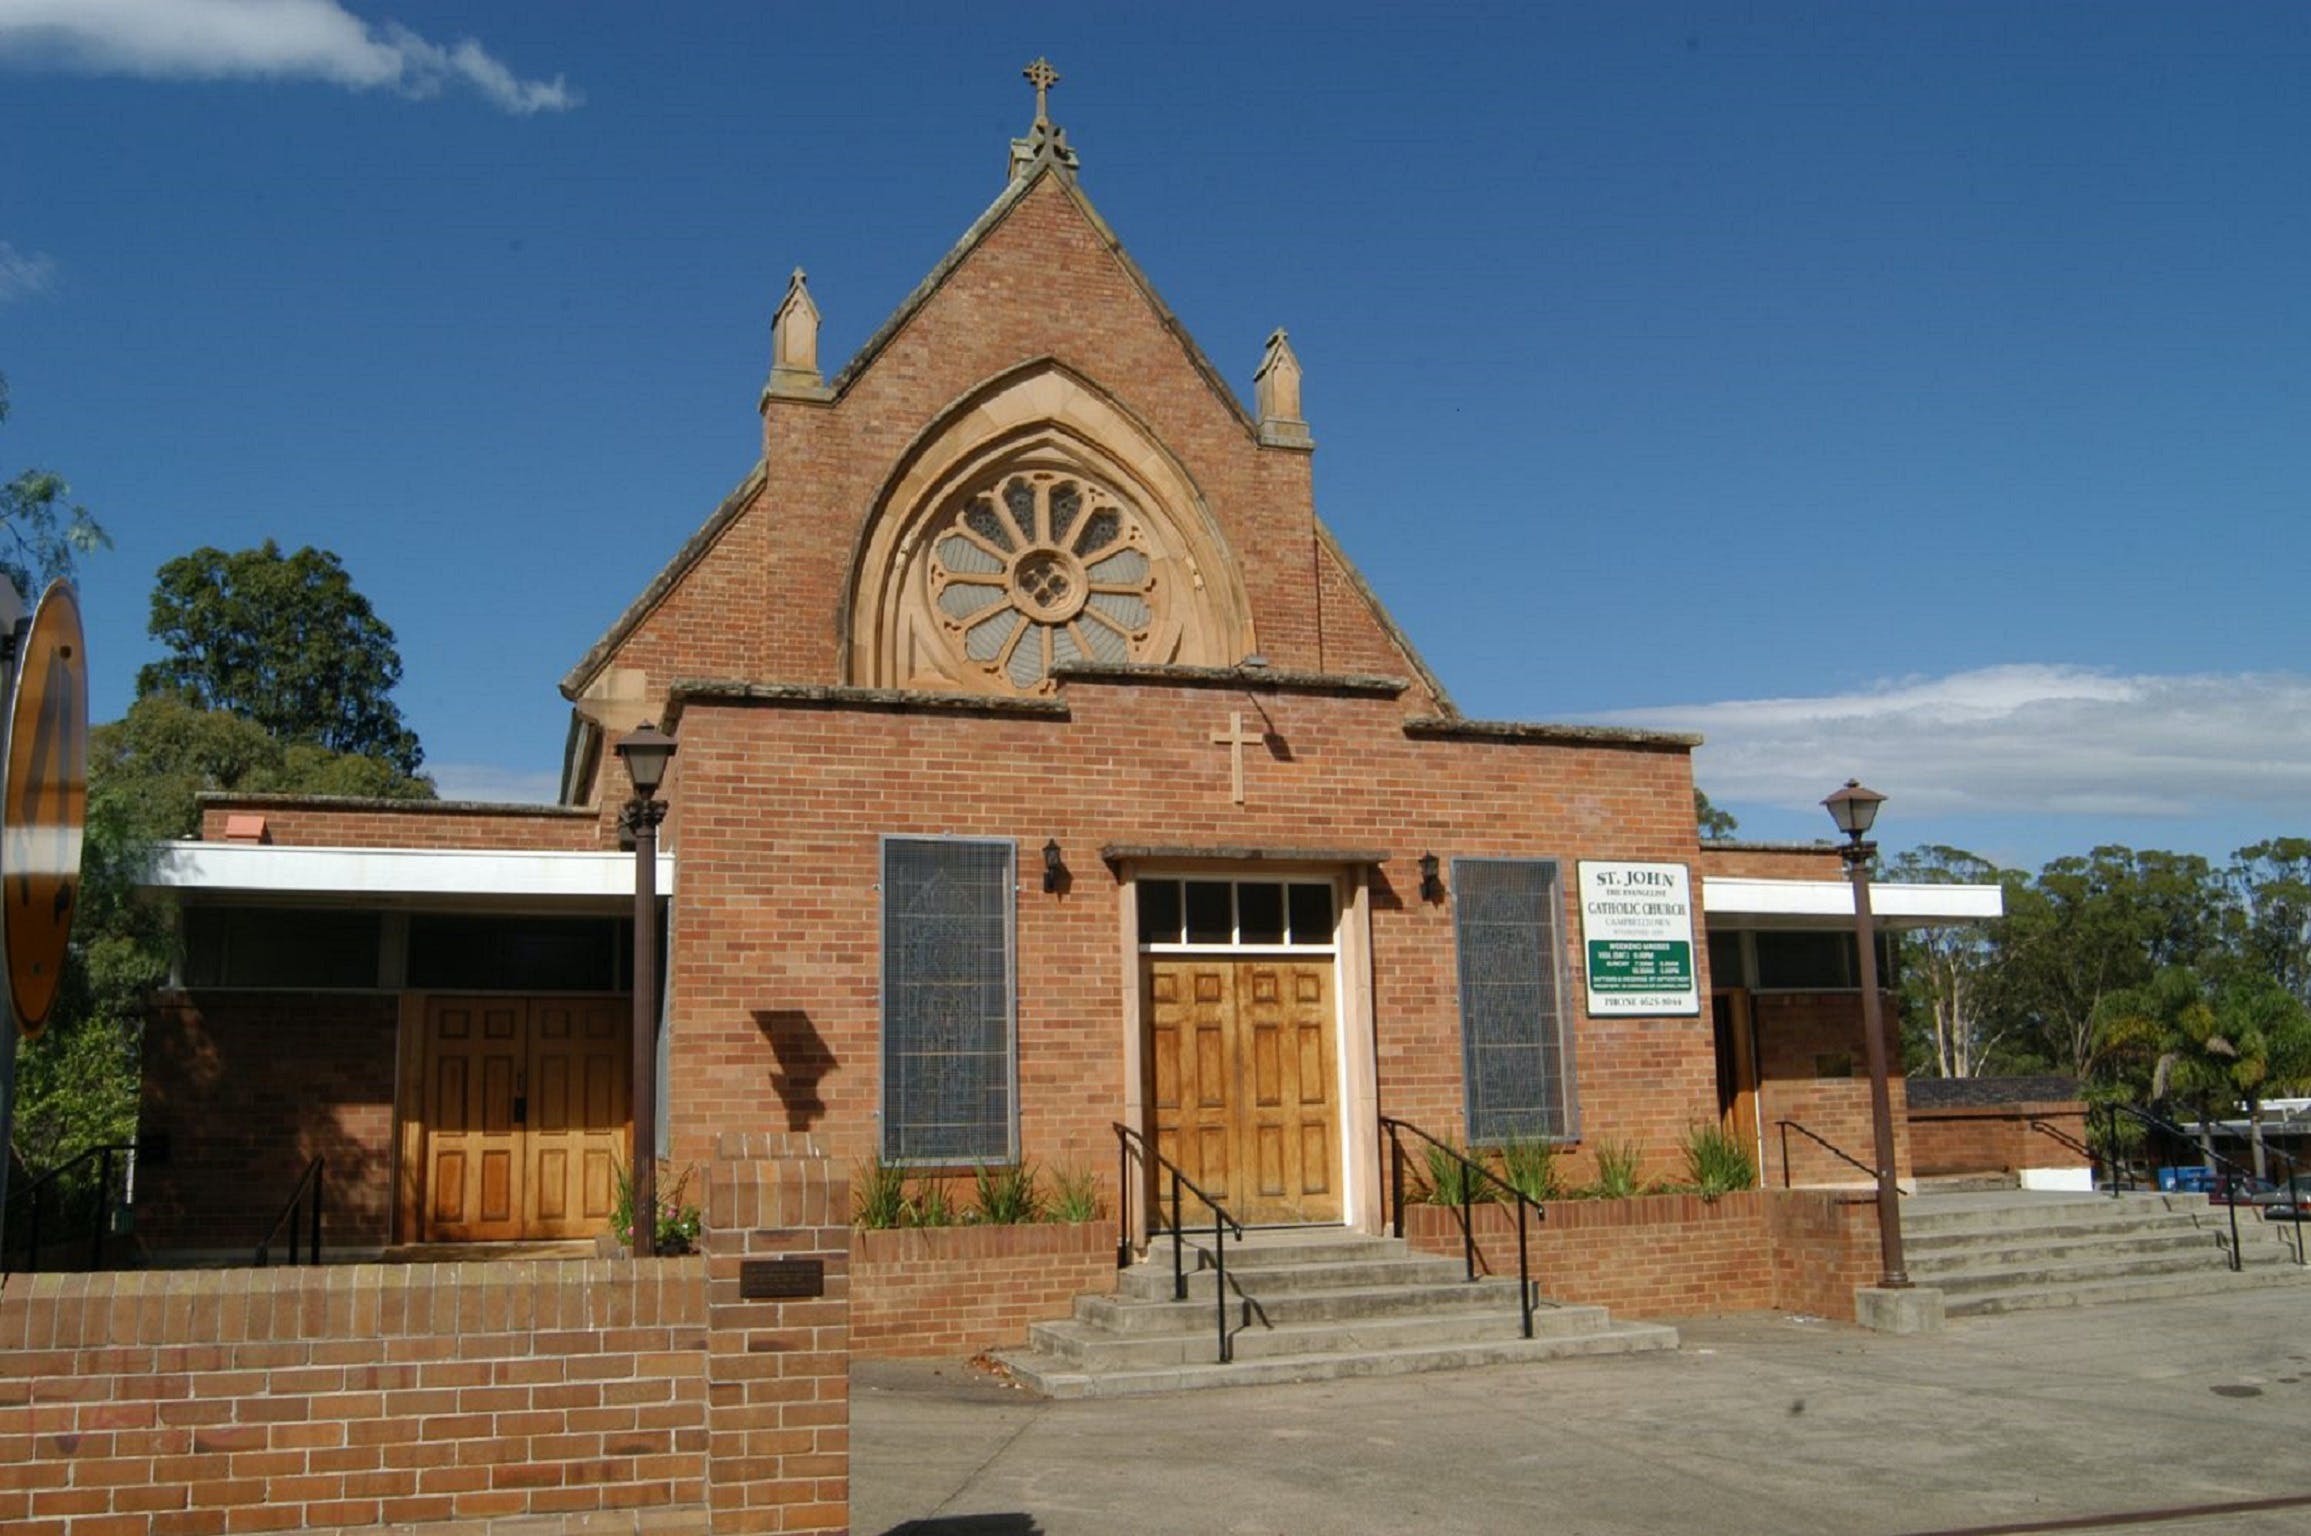 St John's Catholic Church - Find Attractions